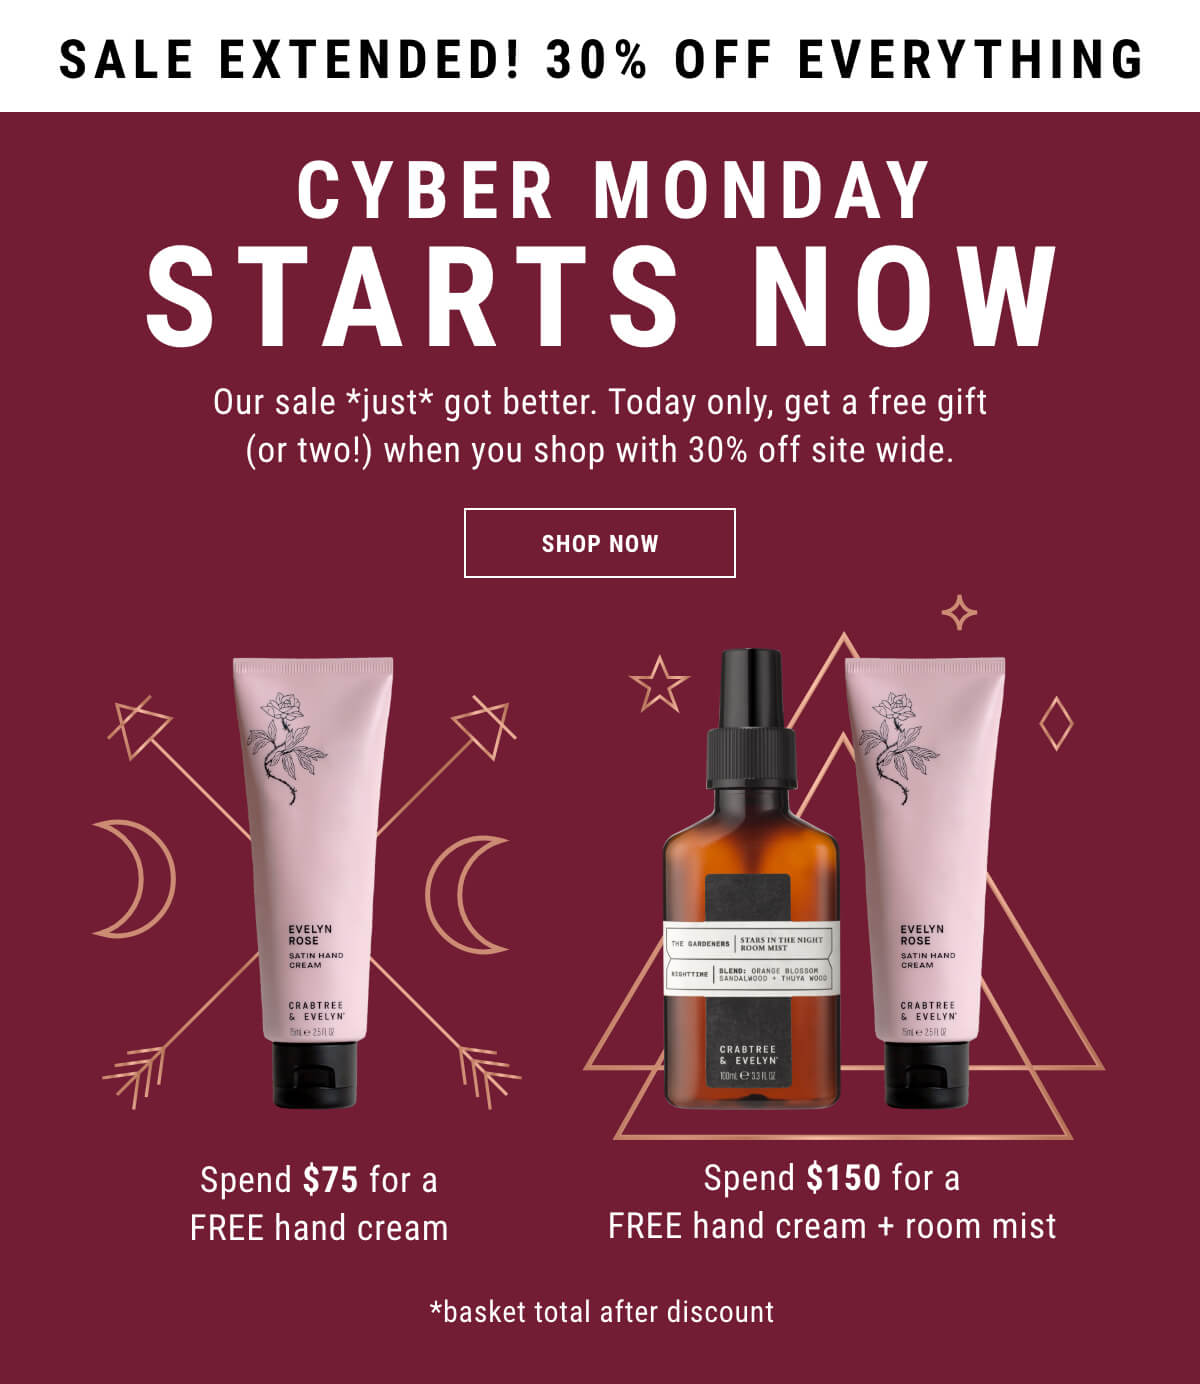 Cyber Monday Starts Now